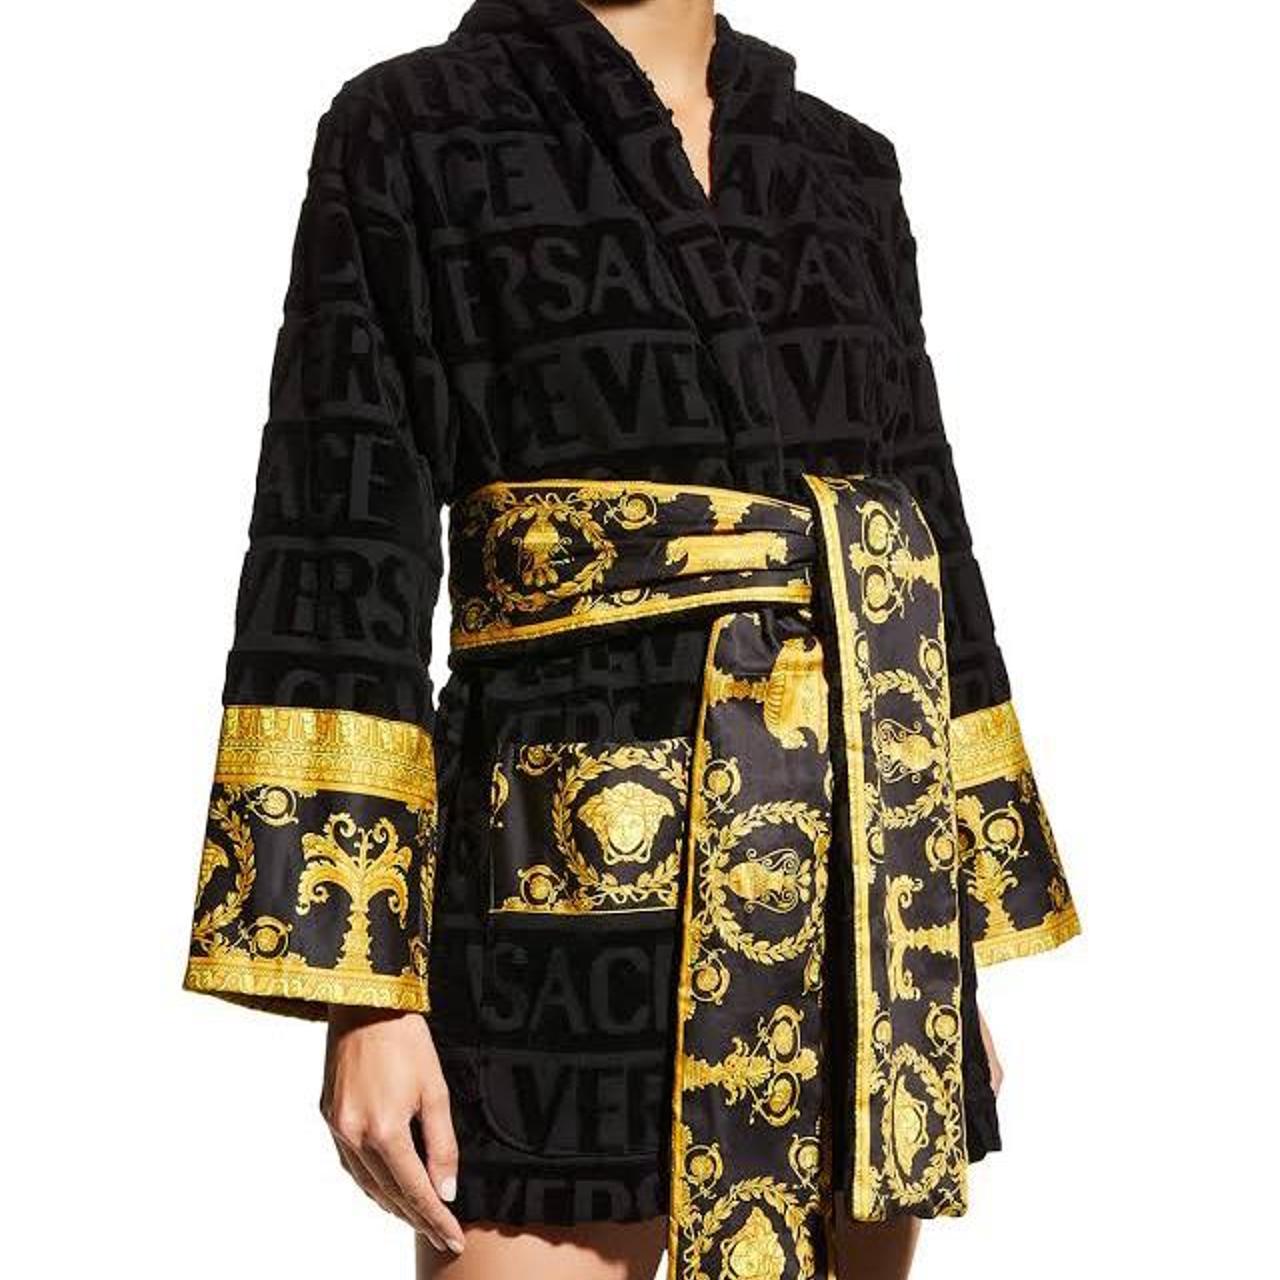 All Black Versace Robe Size Small Worn Once On... - Depop